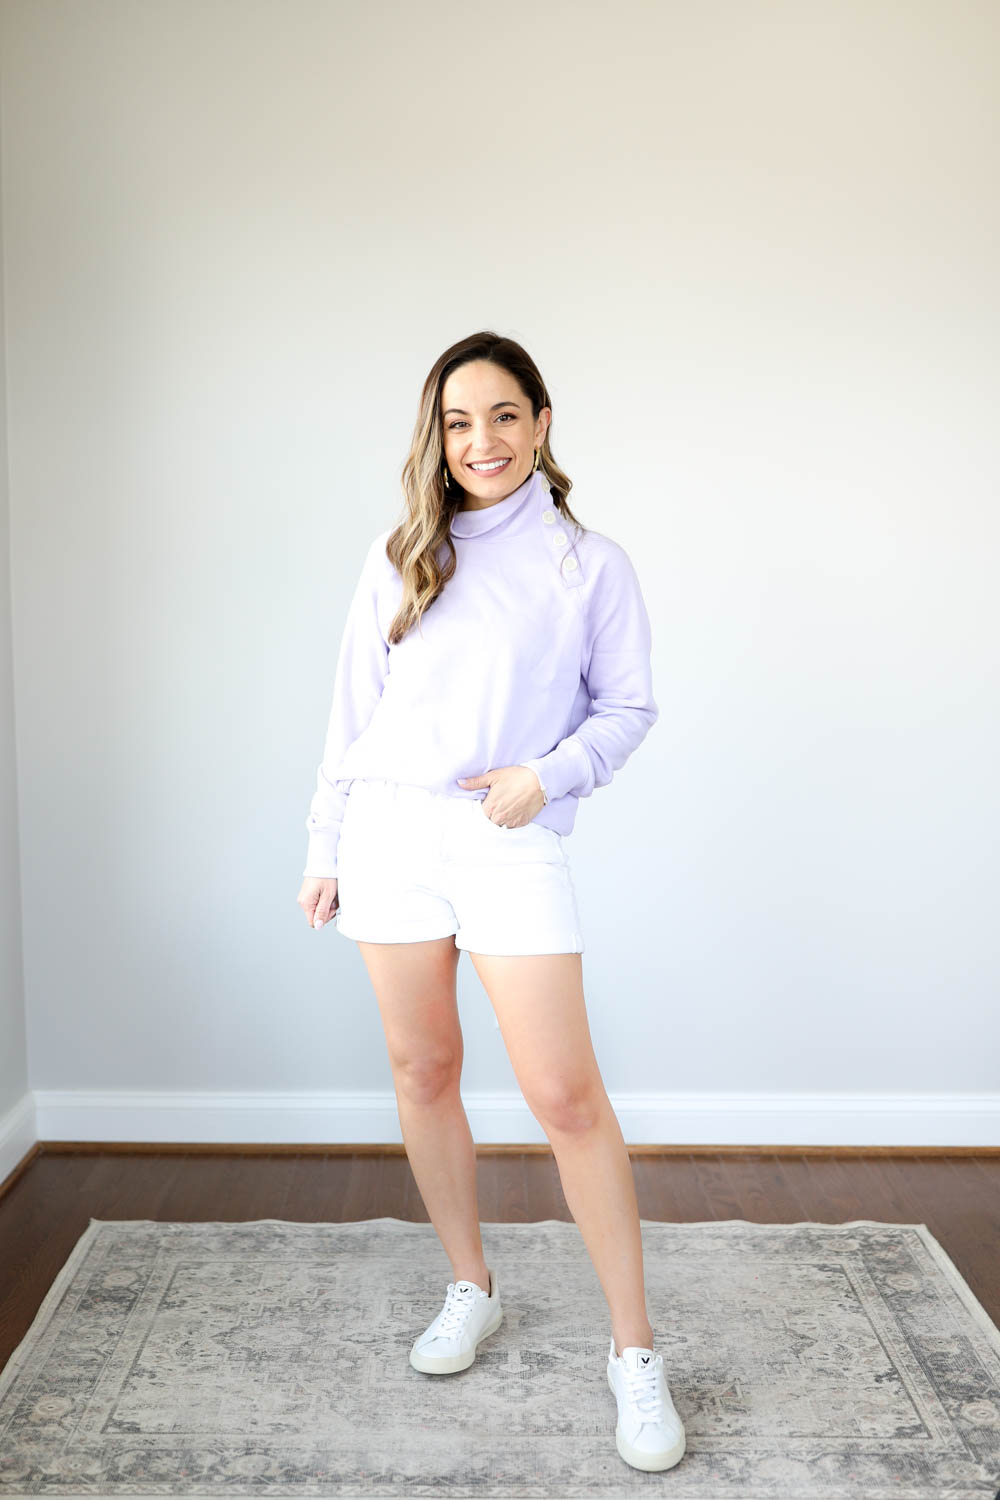 Old Navy O.G. Shorts styled by petite style blogger, Brooke of Pumps and Push-Ups blog | petite style blog | petite fashion | summer shorts 